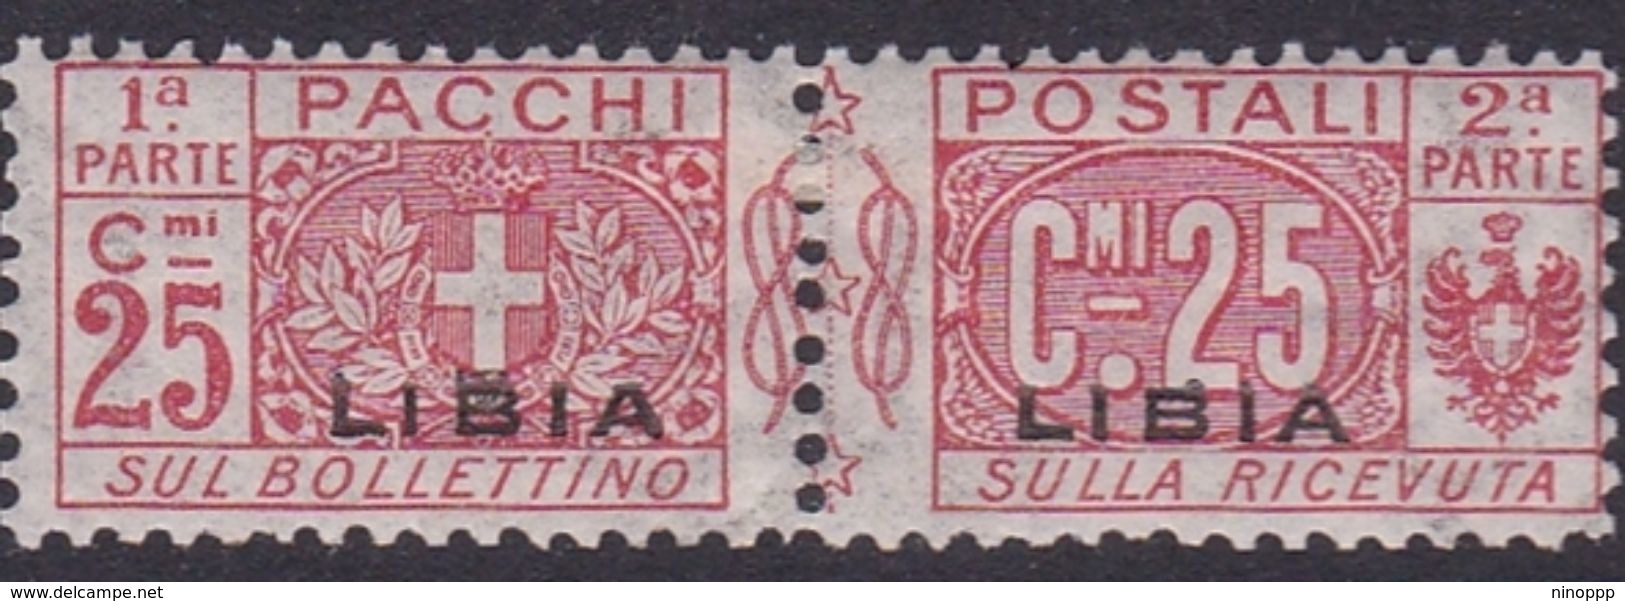 Italy-Colonies And Territories-Libya PP 4 1915-24 Parcel Post,25c Red,mint Hinged - Libya